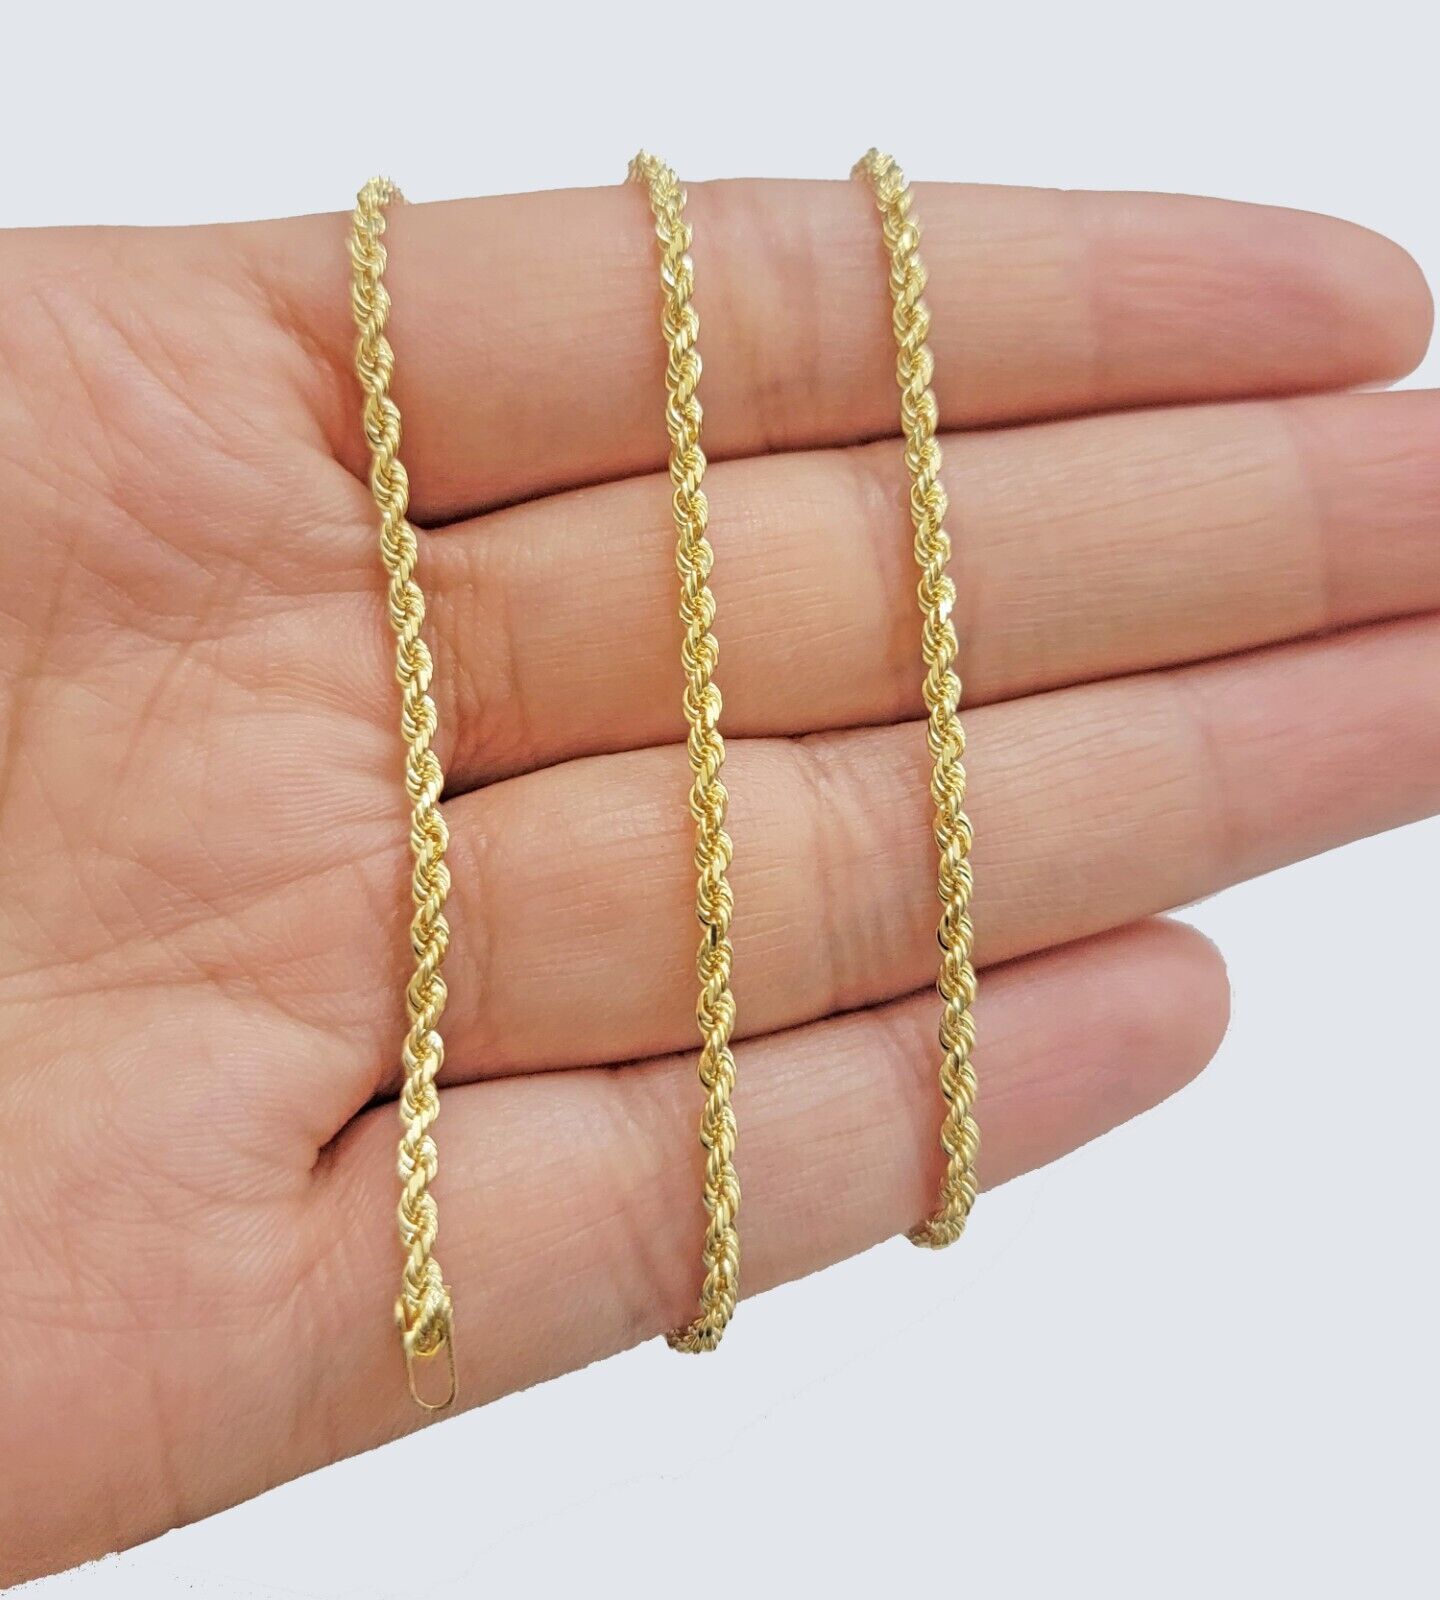 Real 18k Yellow Gold Rope Chain Necklace 22 Inch 2mm Solid 18 KT Men Women, SALE